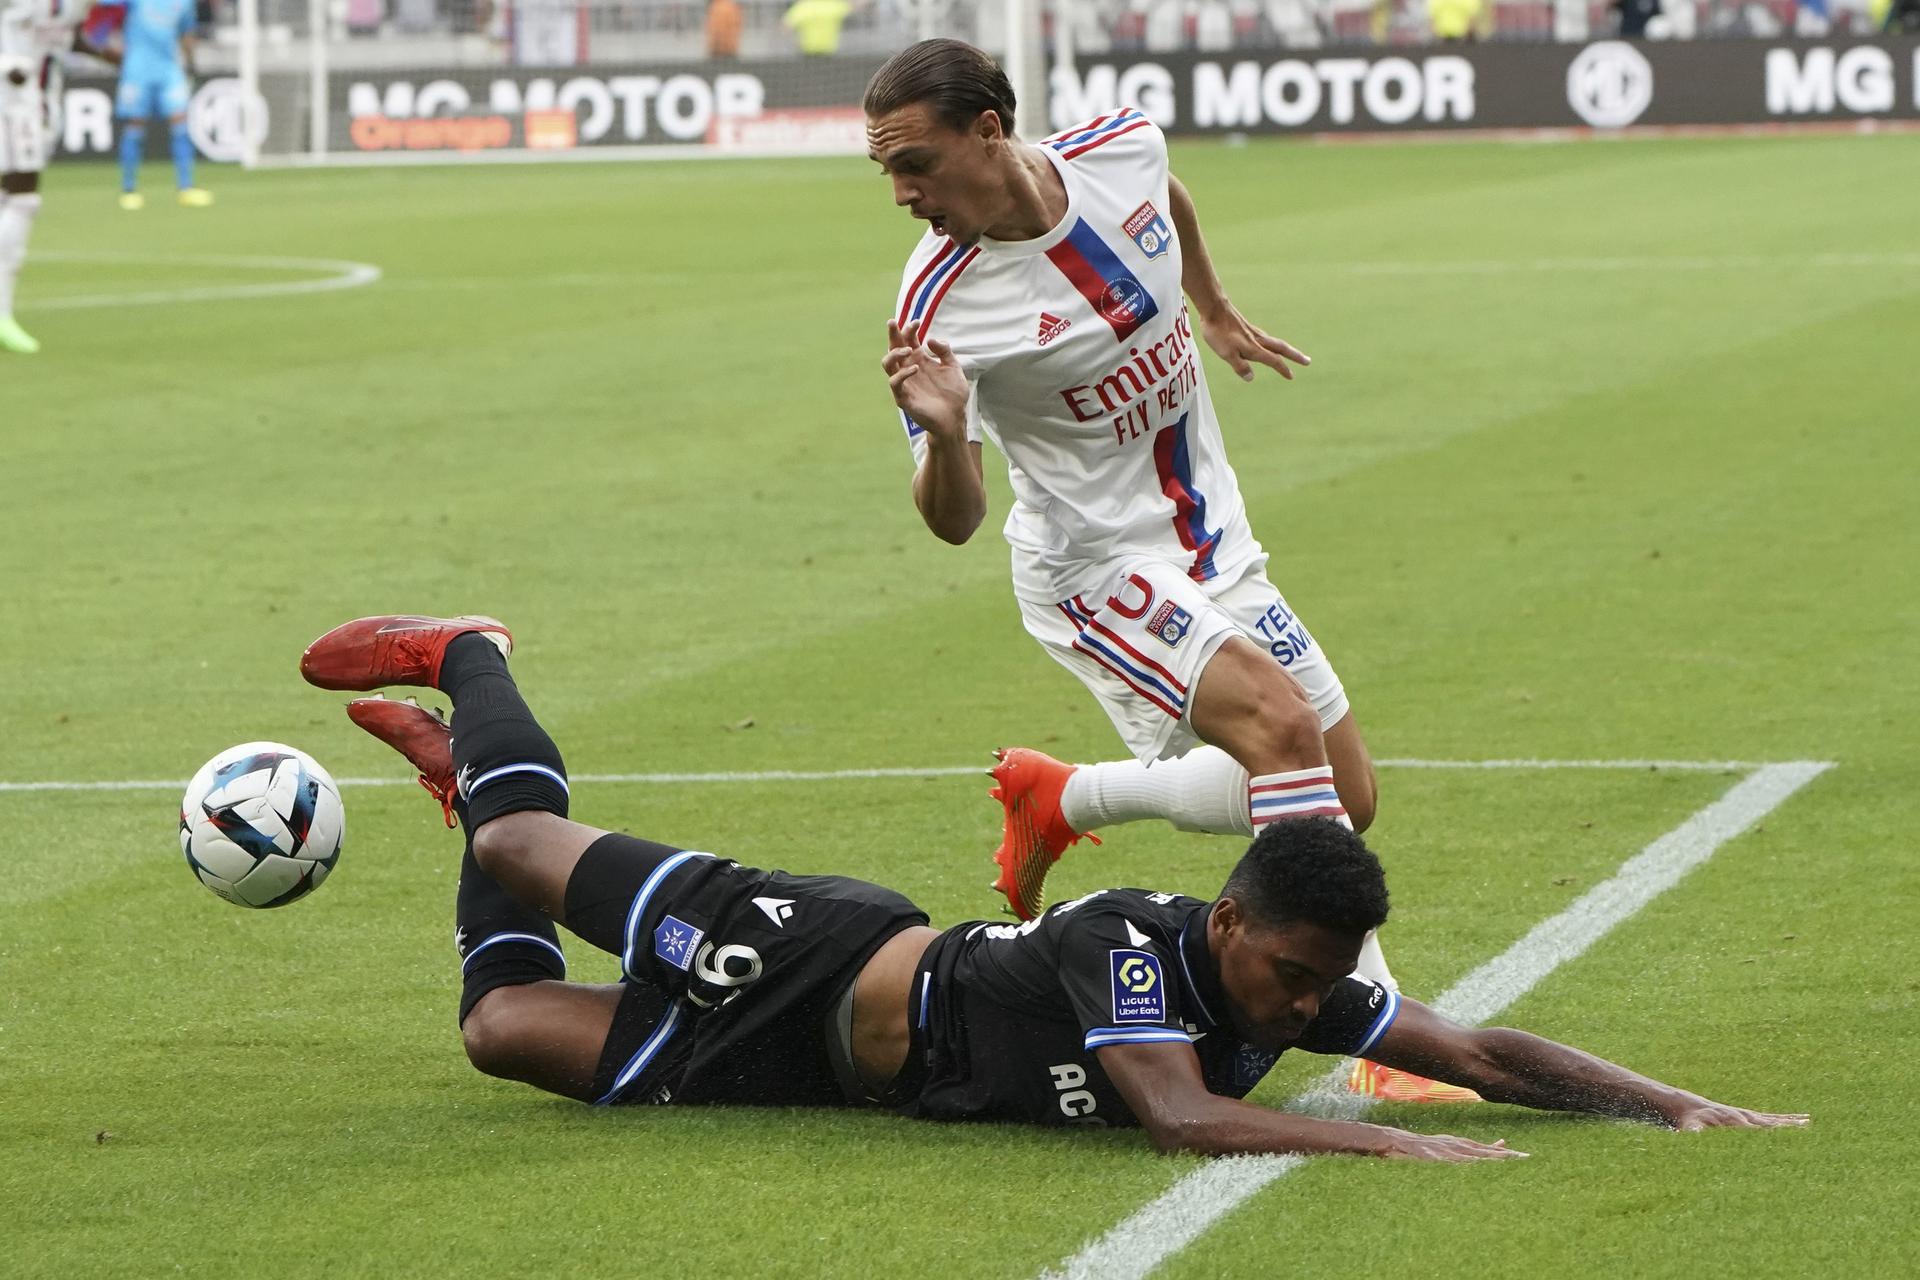 Marseille vs. Auxerre Predictions, Picks and Betting Odds - Saturday, September 3, 2022